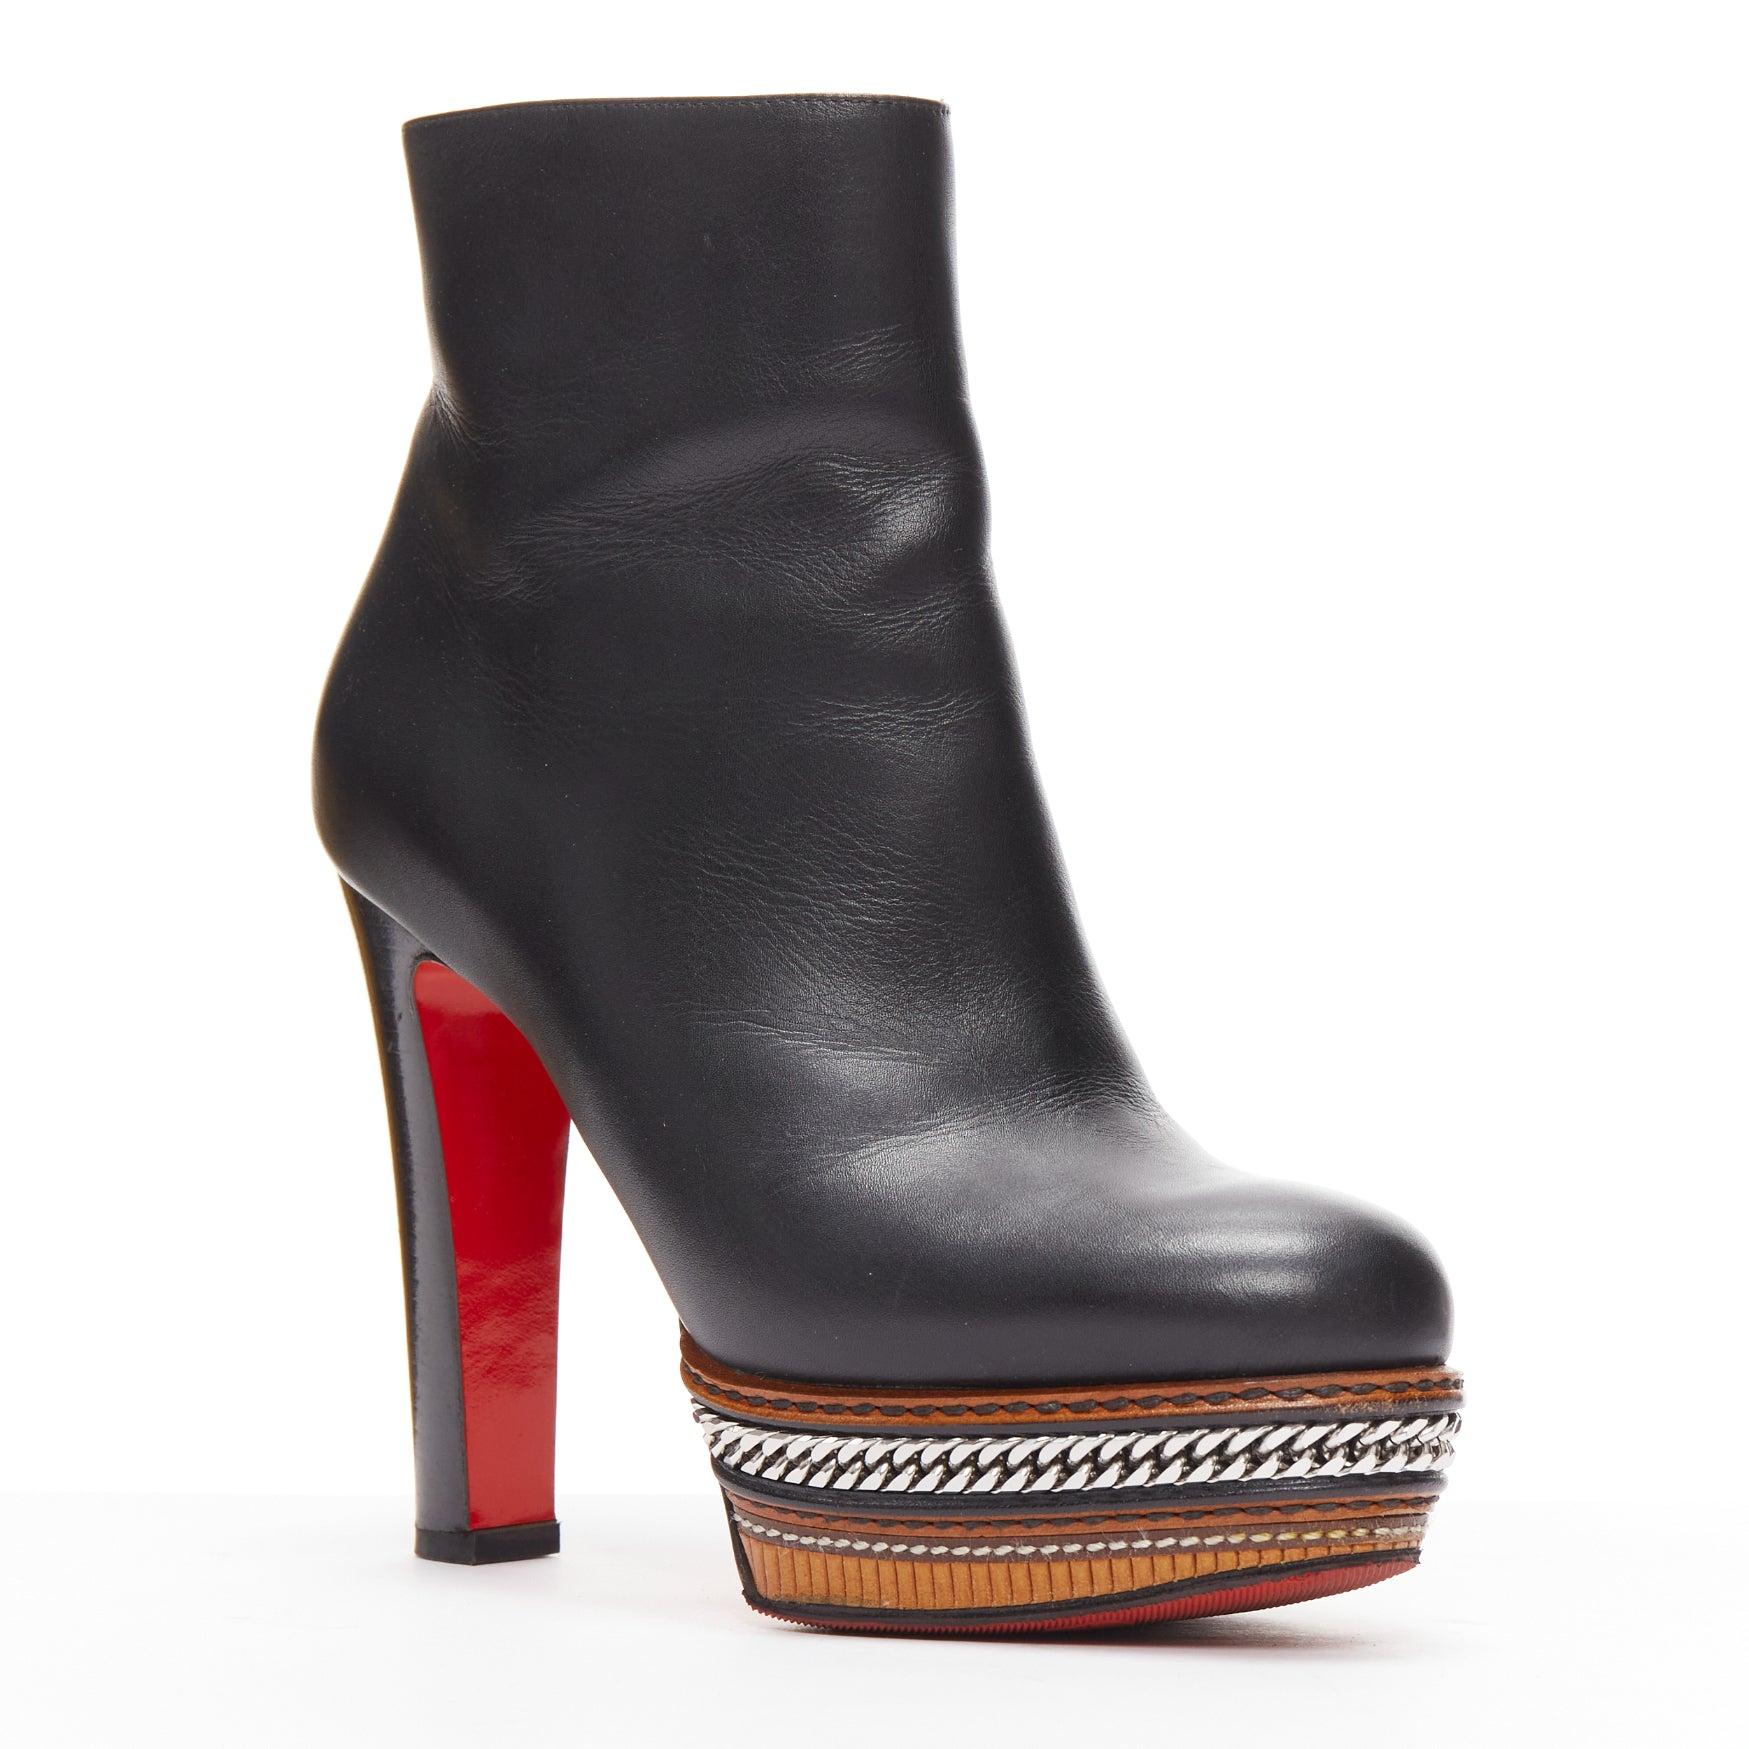 CHRISTIAN LOUBOUTIN Mille Tranche 120 black brown chain platform bootie EU37
Reference: TGAS/D00914
Brand: Christian Louboutin
Model: Mille Tranche 120
Material: Leather
Color: Black, Brown
Pattern: Solid
Closure: Zip
Lining: Tan Brown Leather
Extra